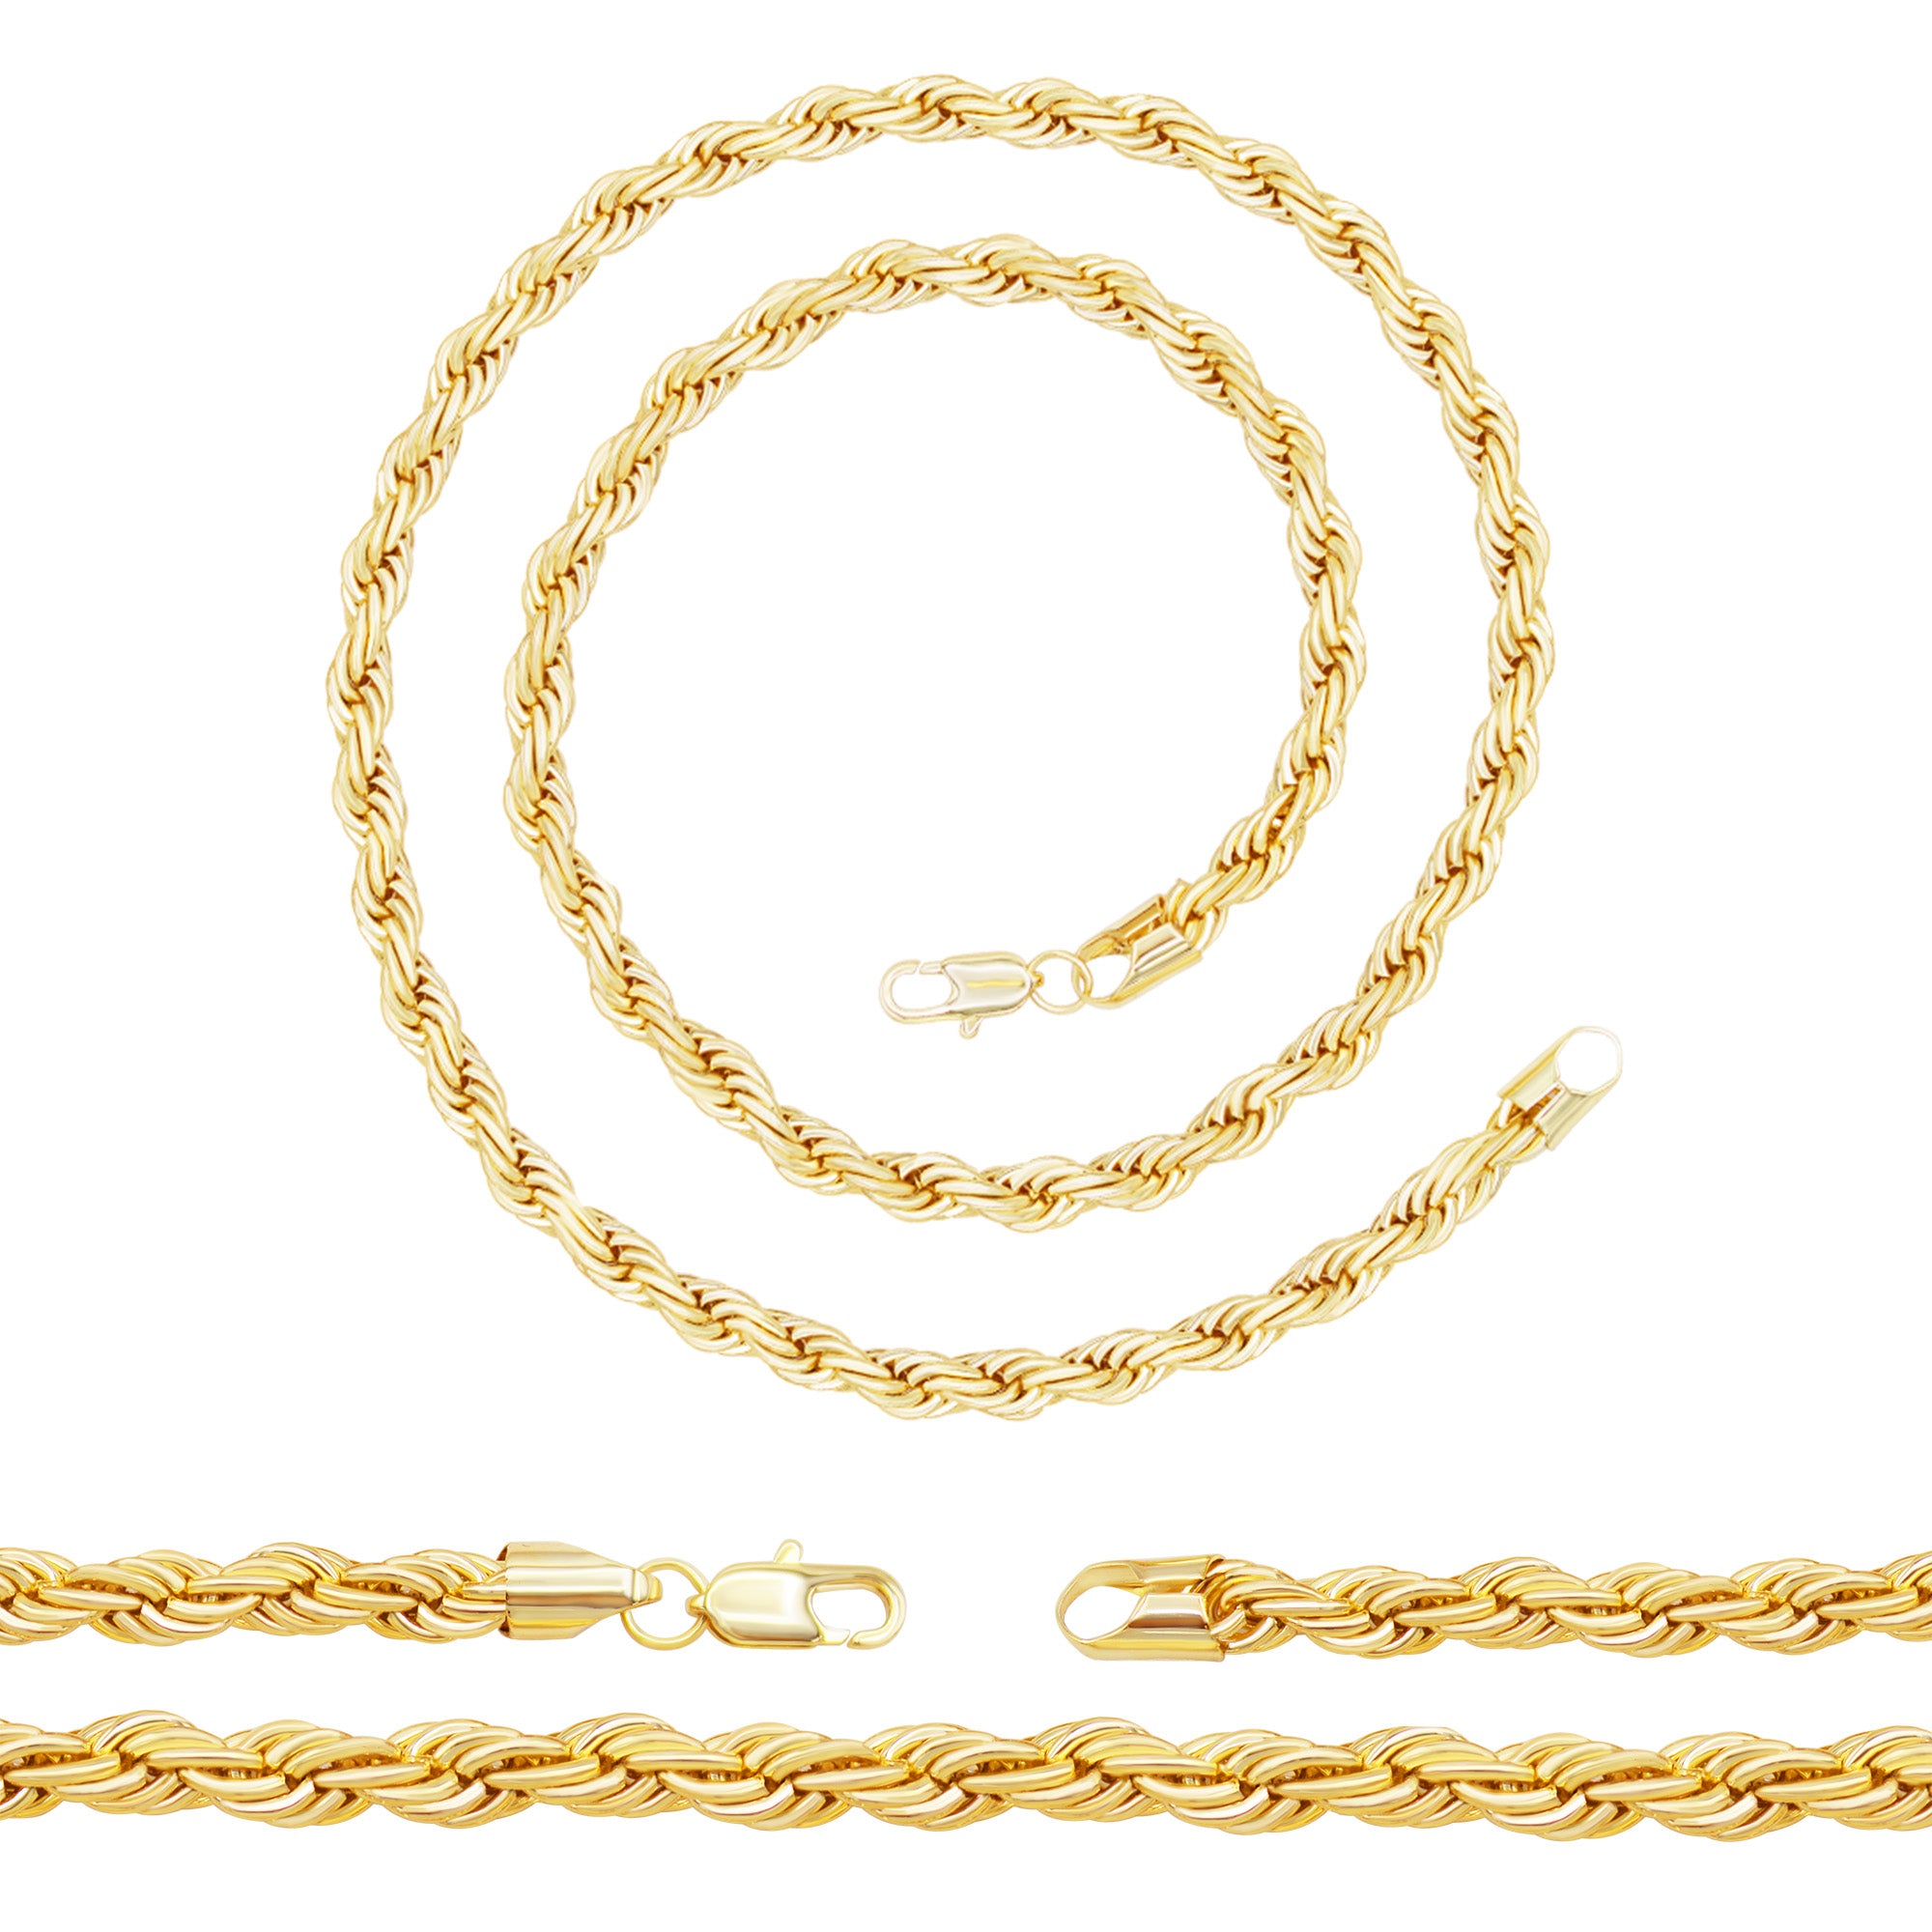 14K Gold Filled Rope Chain Necklace 24 6 mm